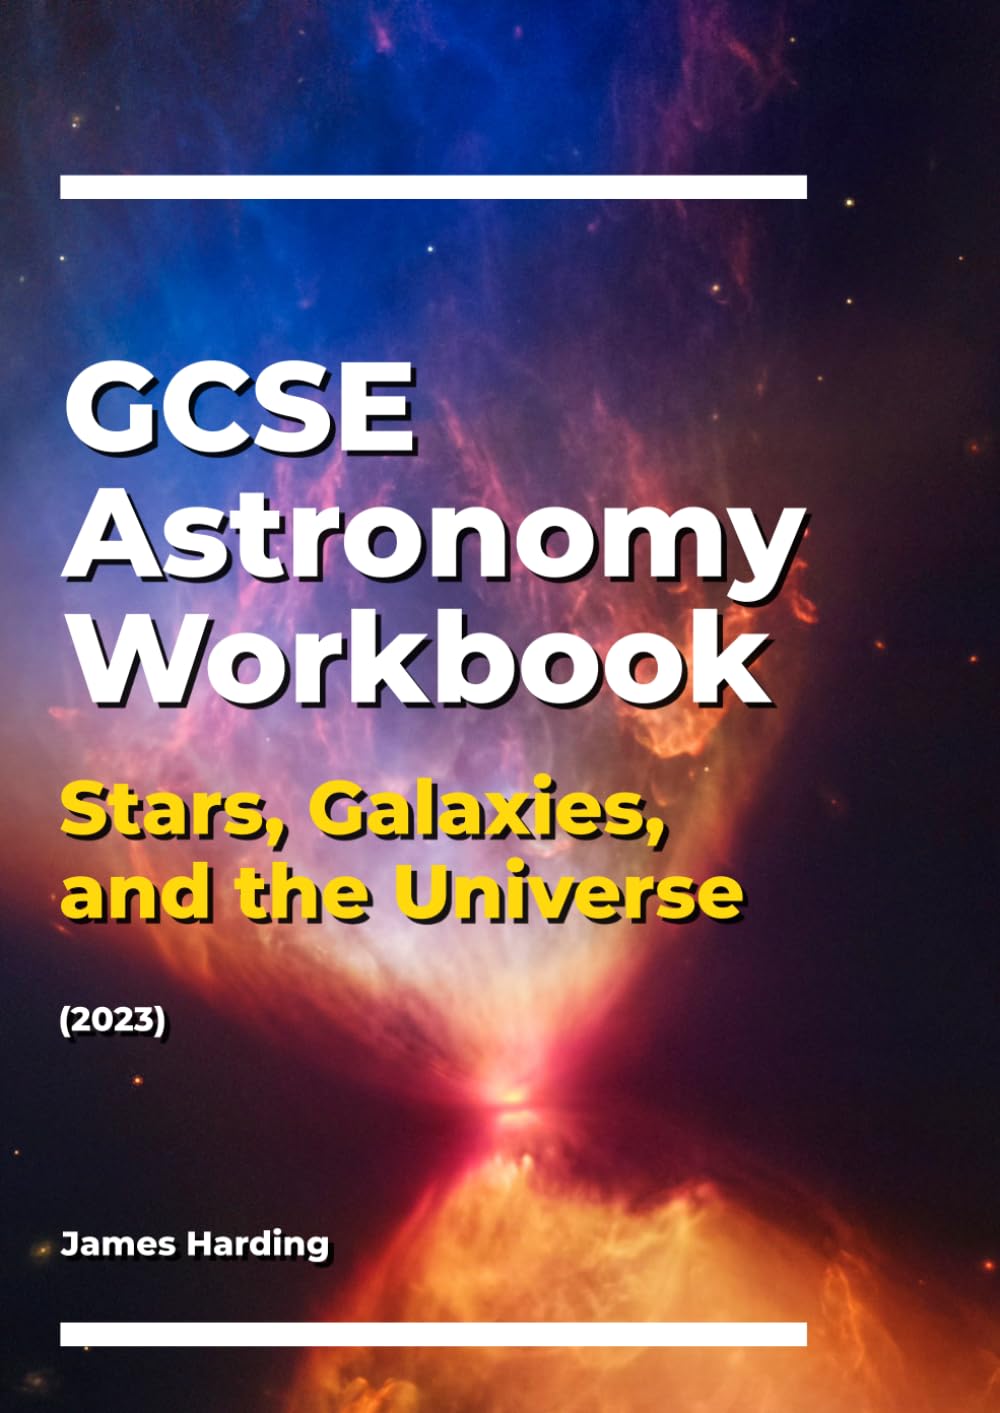 GCSE Astronomy Workbook – Stars, Galaxies, and the Universe (2023)